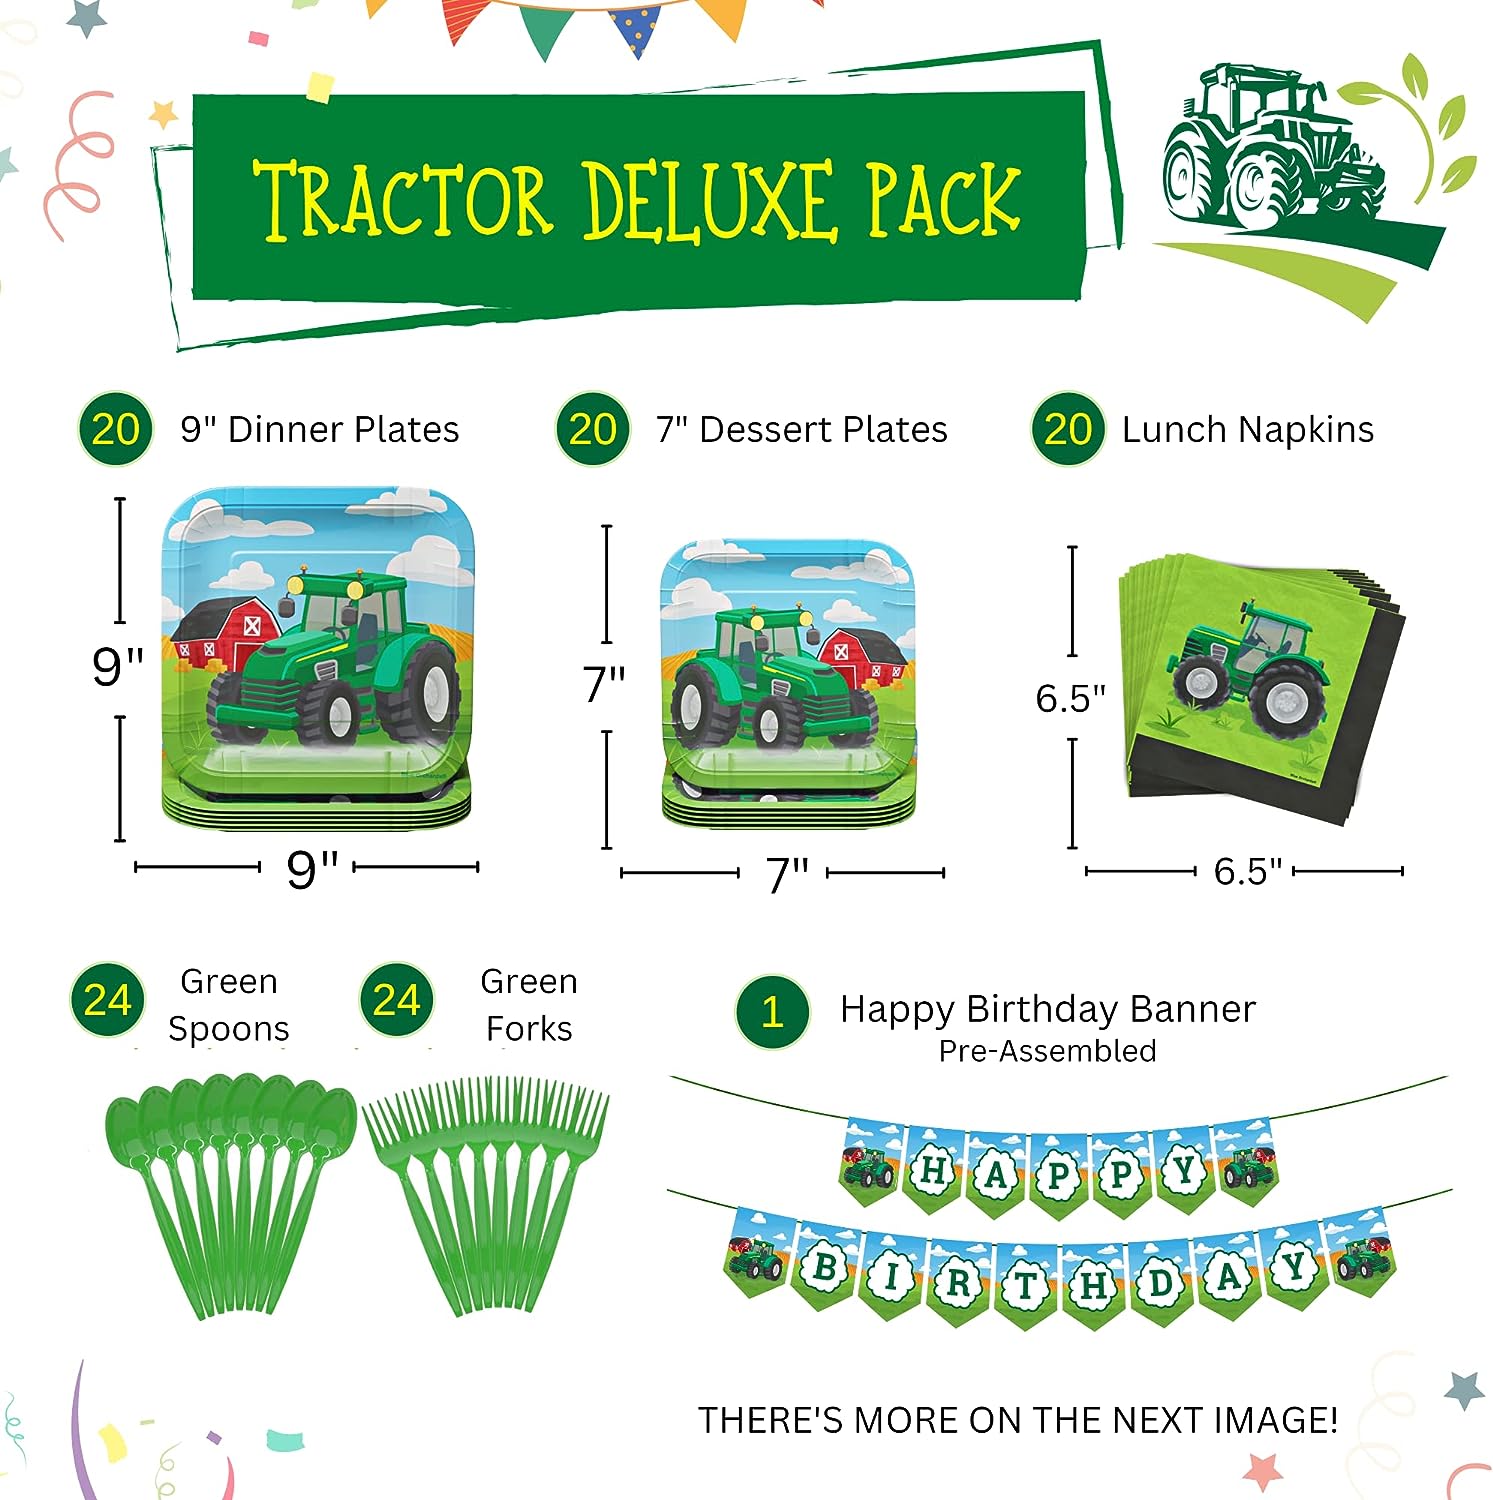 Tractor Deluxe Pack - Contains (20) 9" Dinner Plates - (20) 7" Dessert Plates - (20) Lunch Napkins - (1) Happy Birthday Banner - (24) Green Spoons - (24) Green Forks